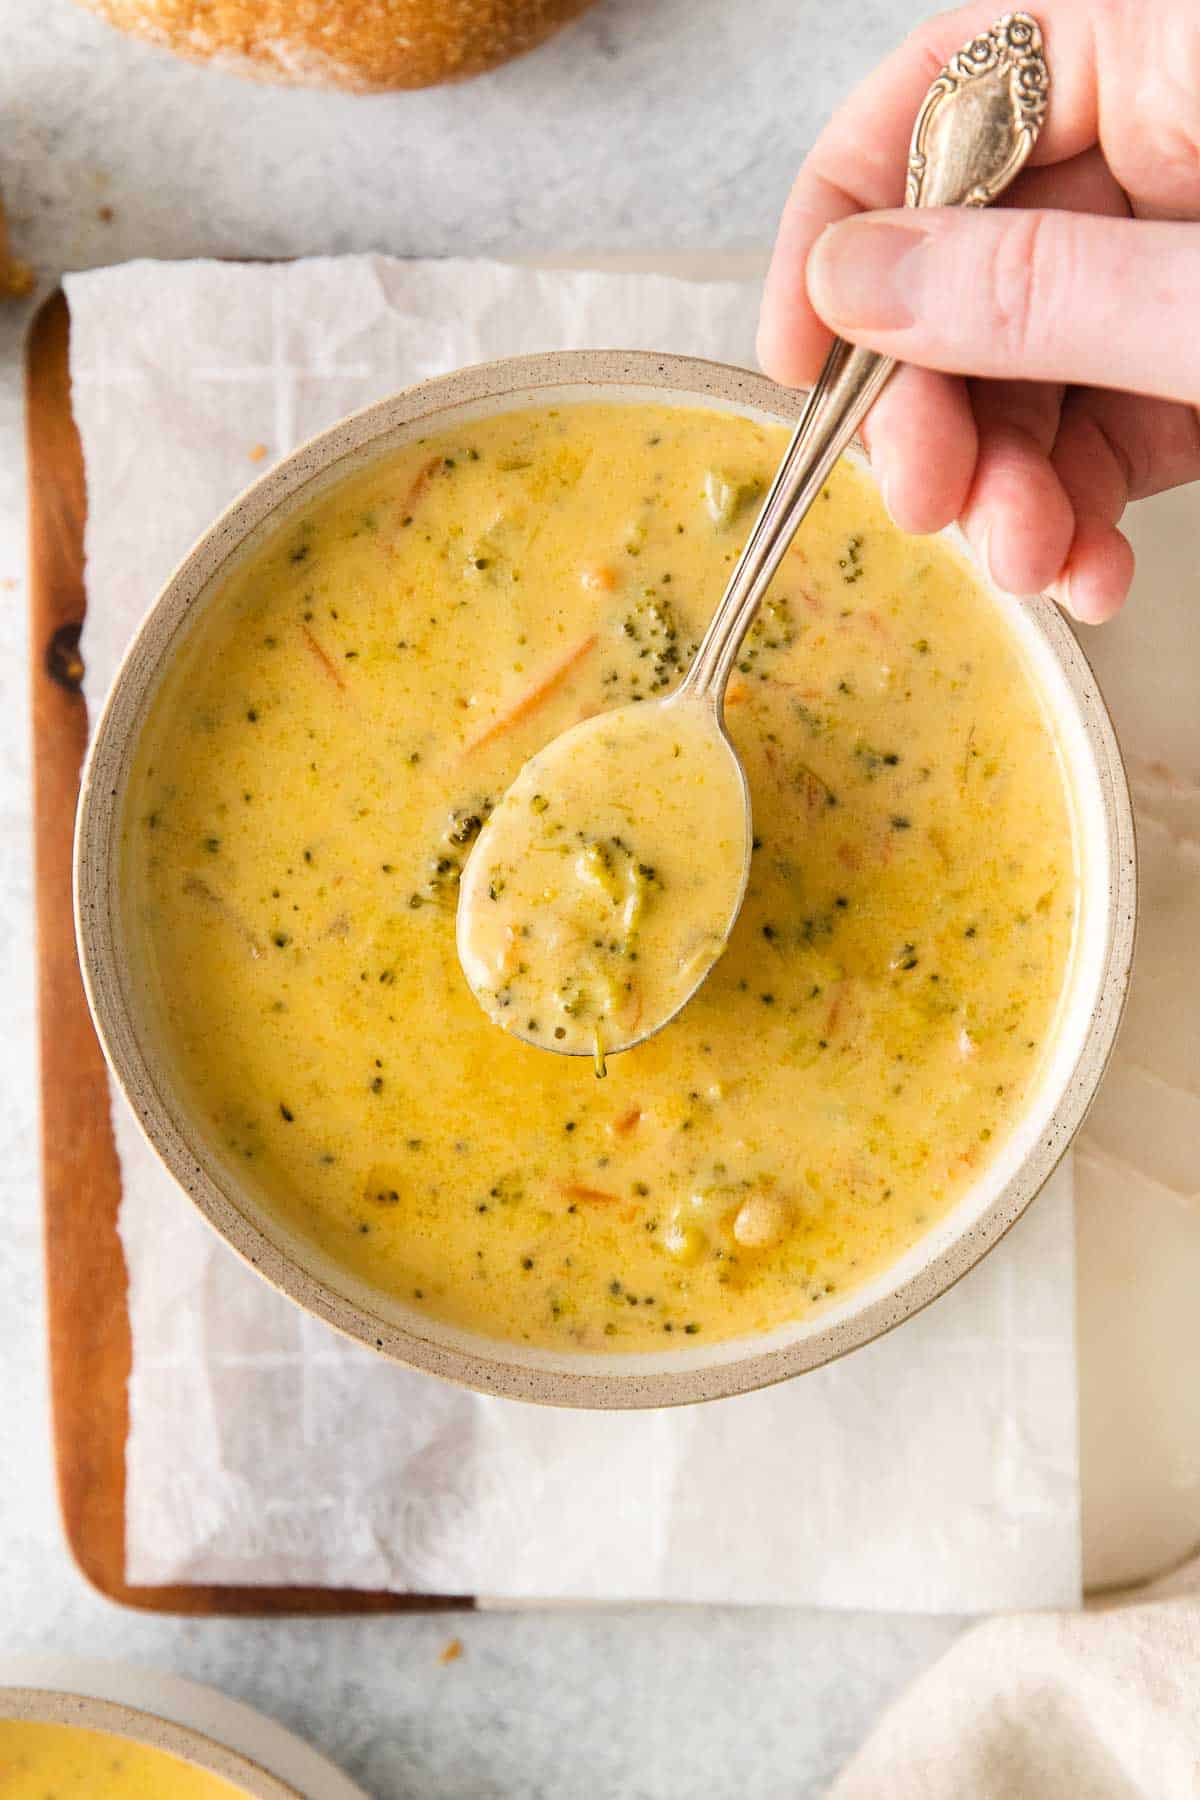 spoonful of broccoli cheese soup being held over a bowl full of soup.